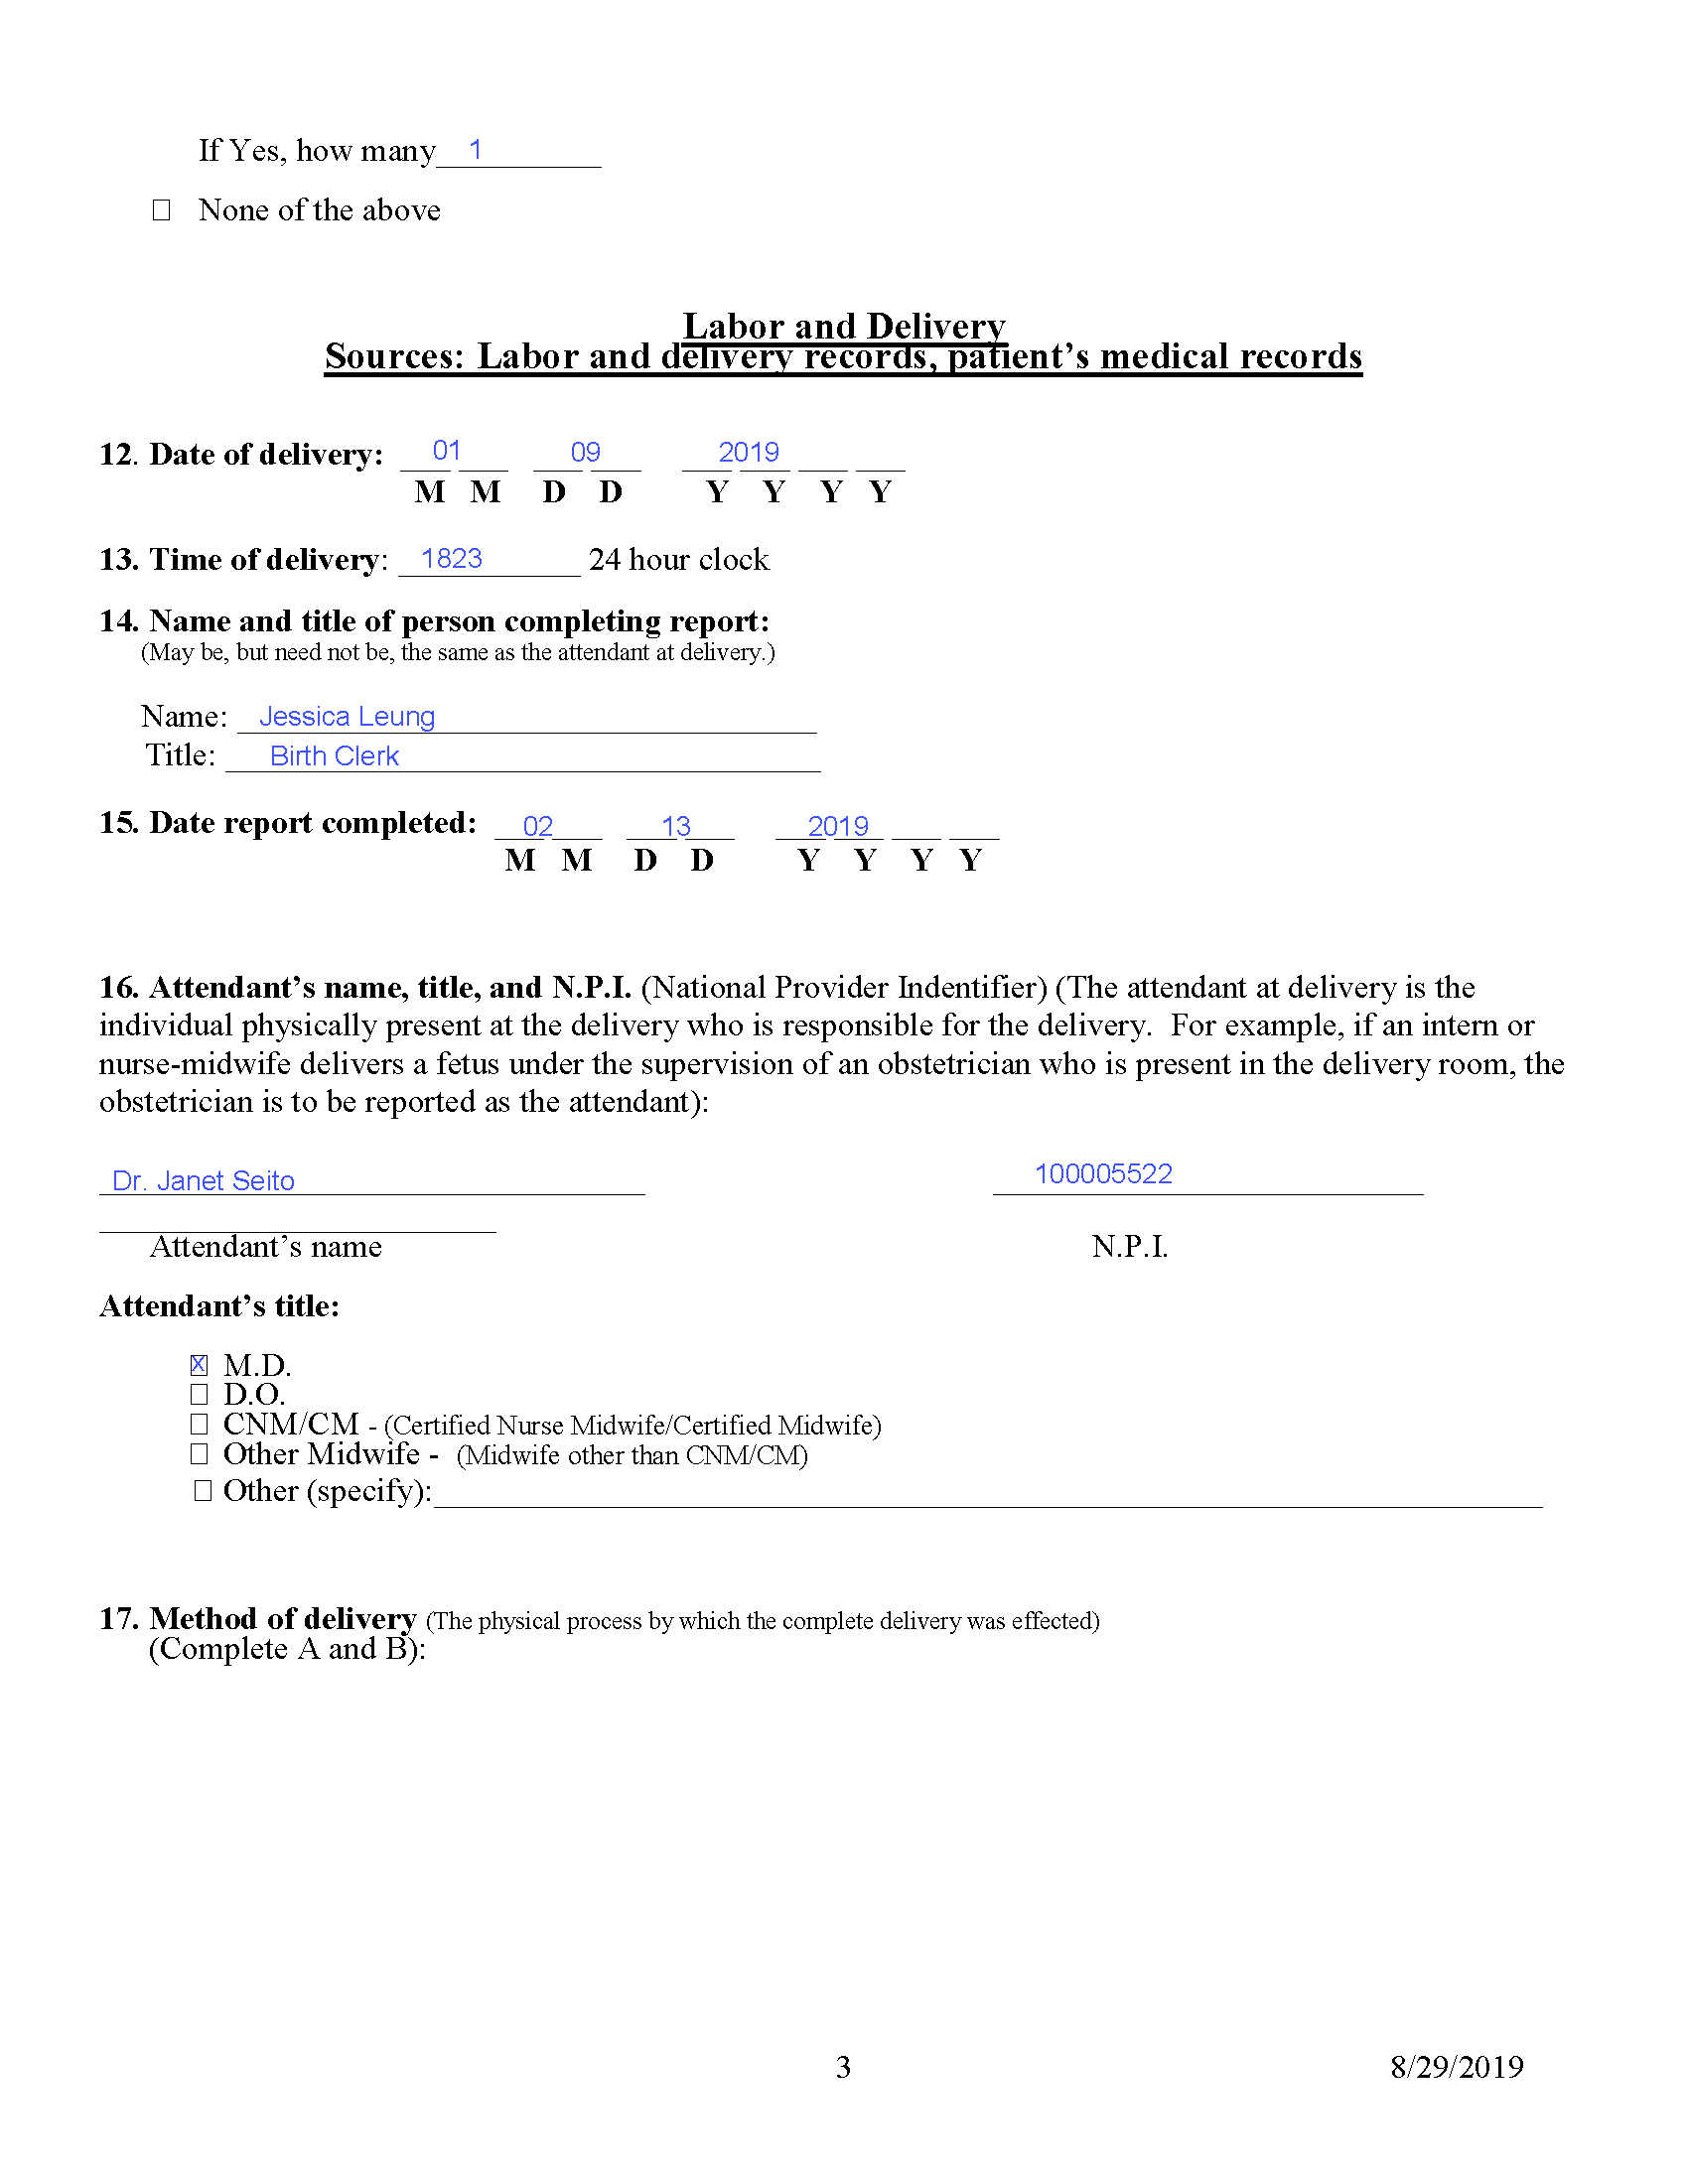 Example Facility Worksheet for Fetal Death Report - p3